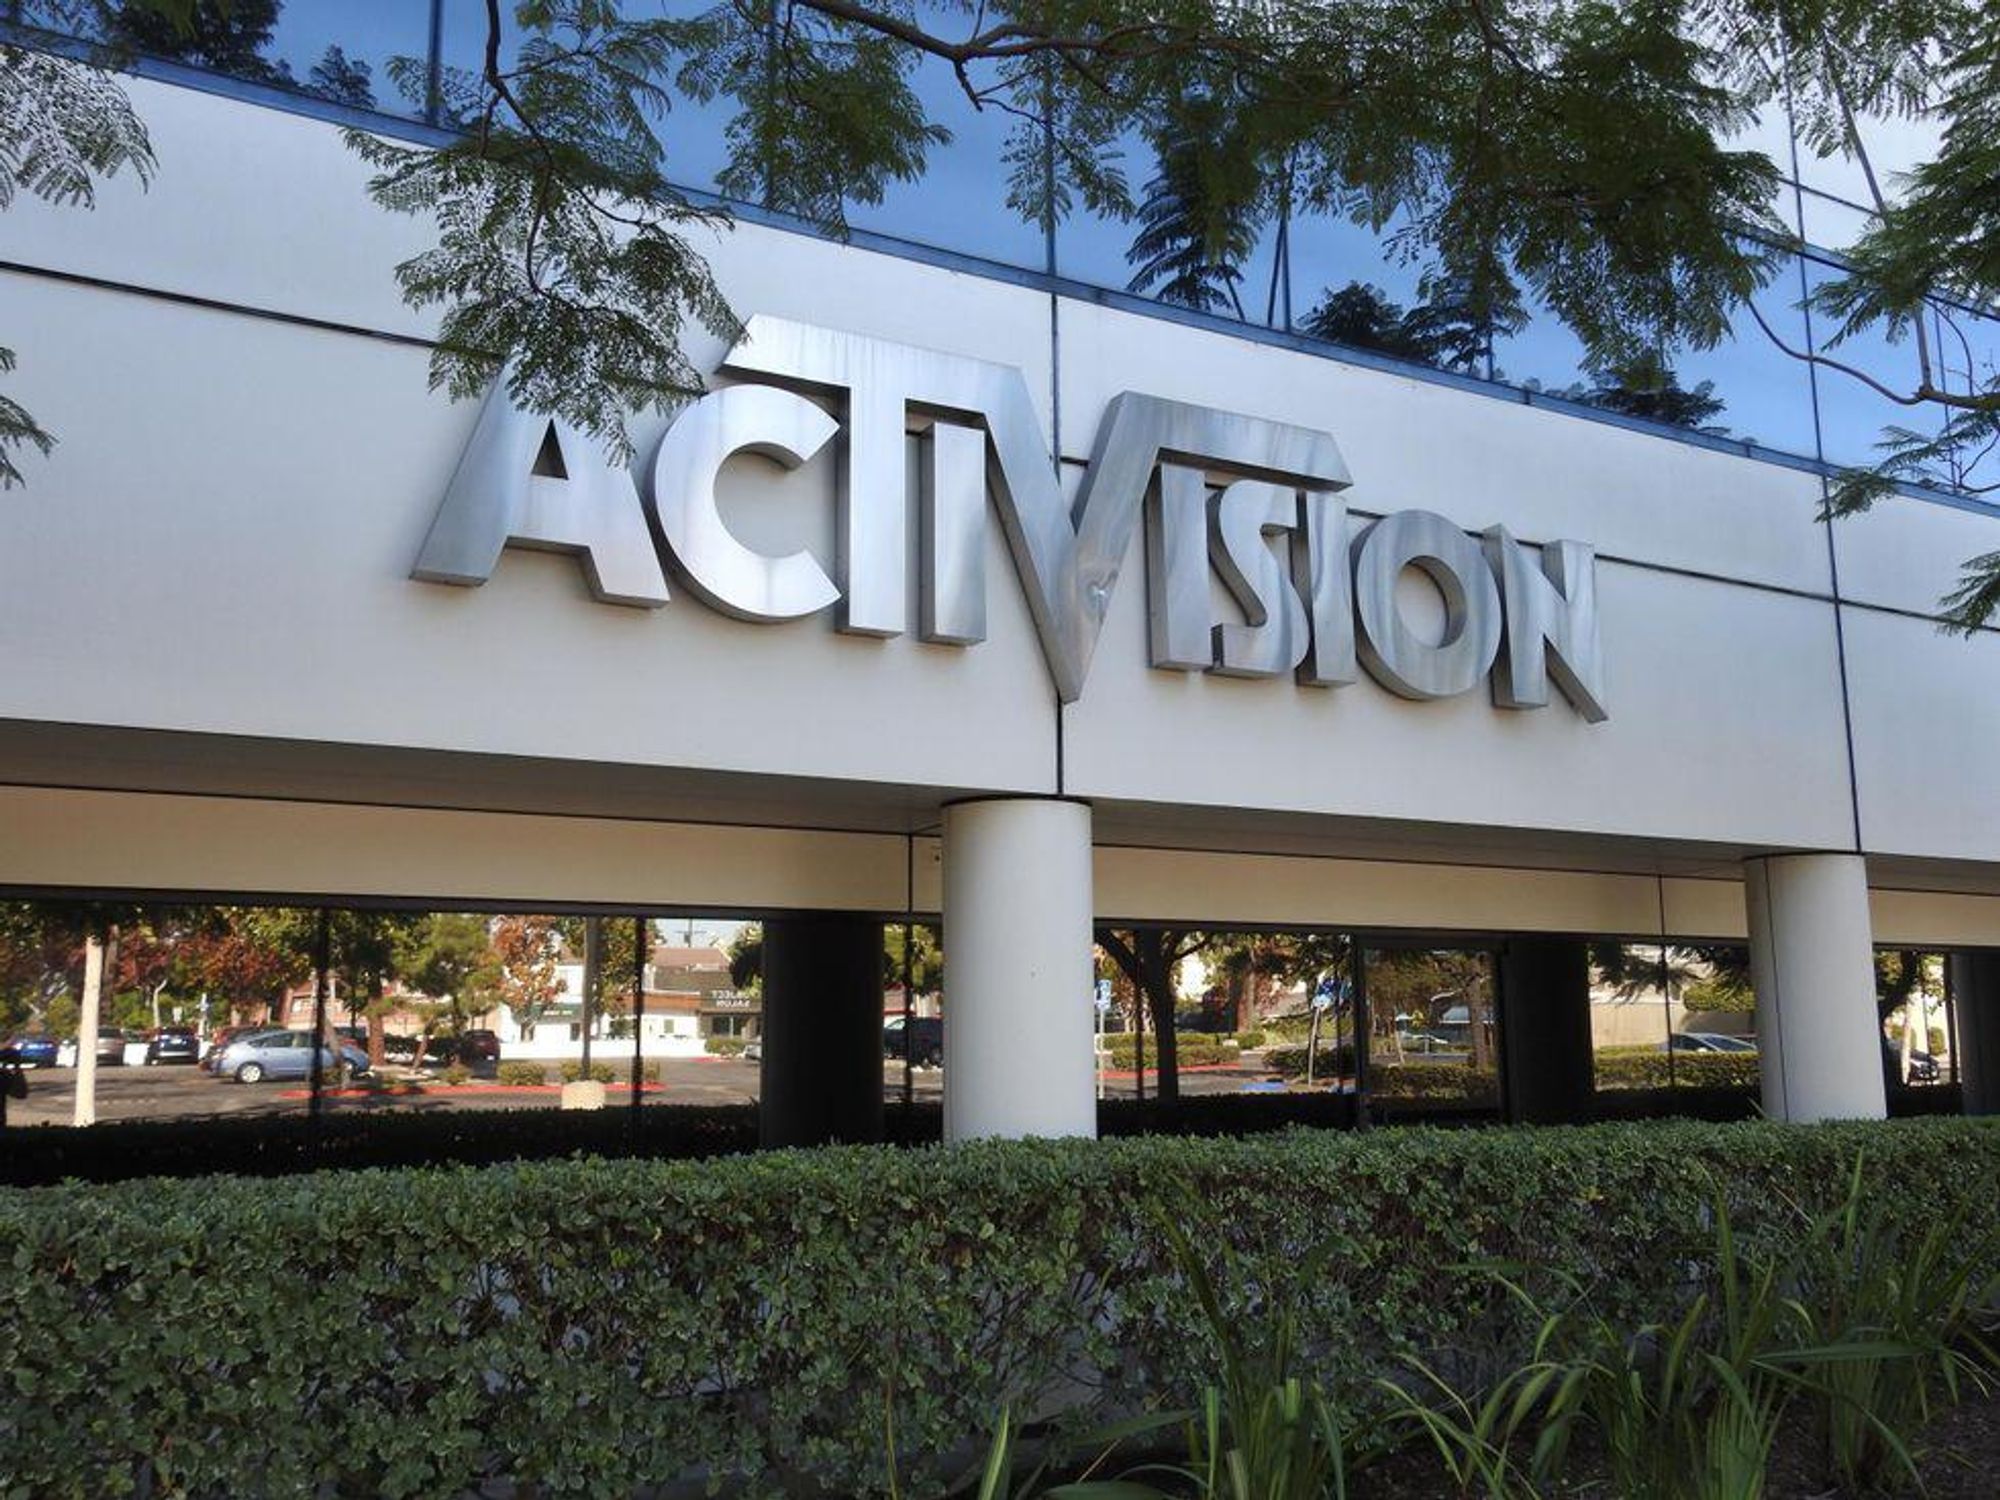 Microsoft acquiring Activision Blizzard in $68.7B gaming deal